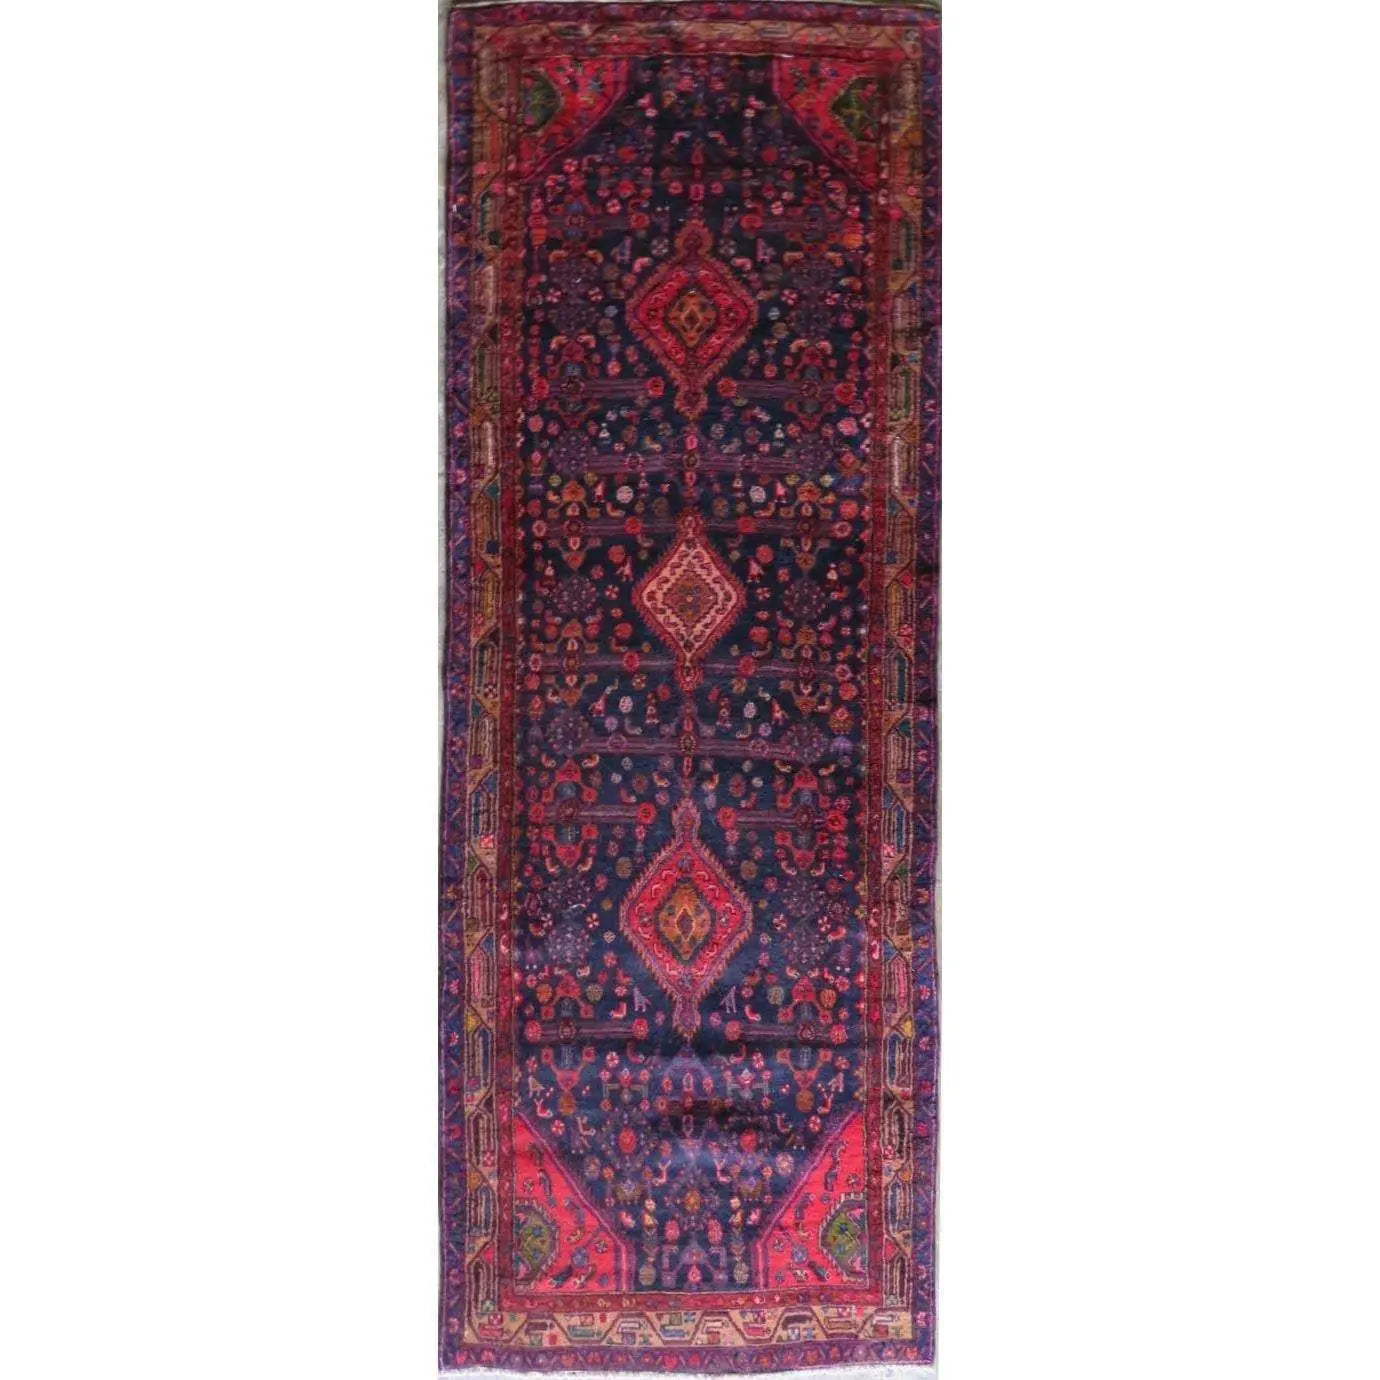 Hand-Knotted Persian Wool Rug _ Luxurious Vintage Design, 11'2" x 3'7", Artisan Crafted